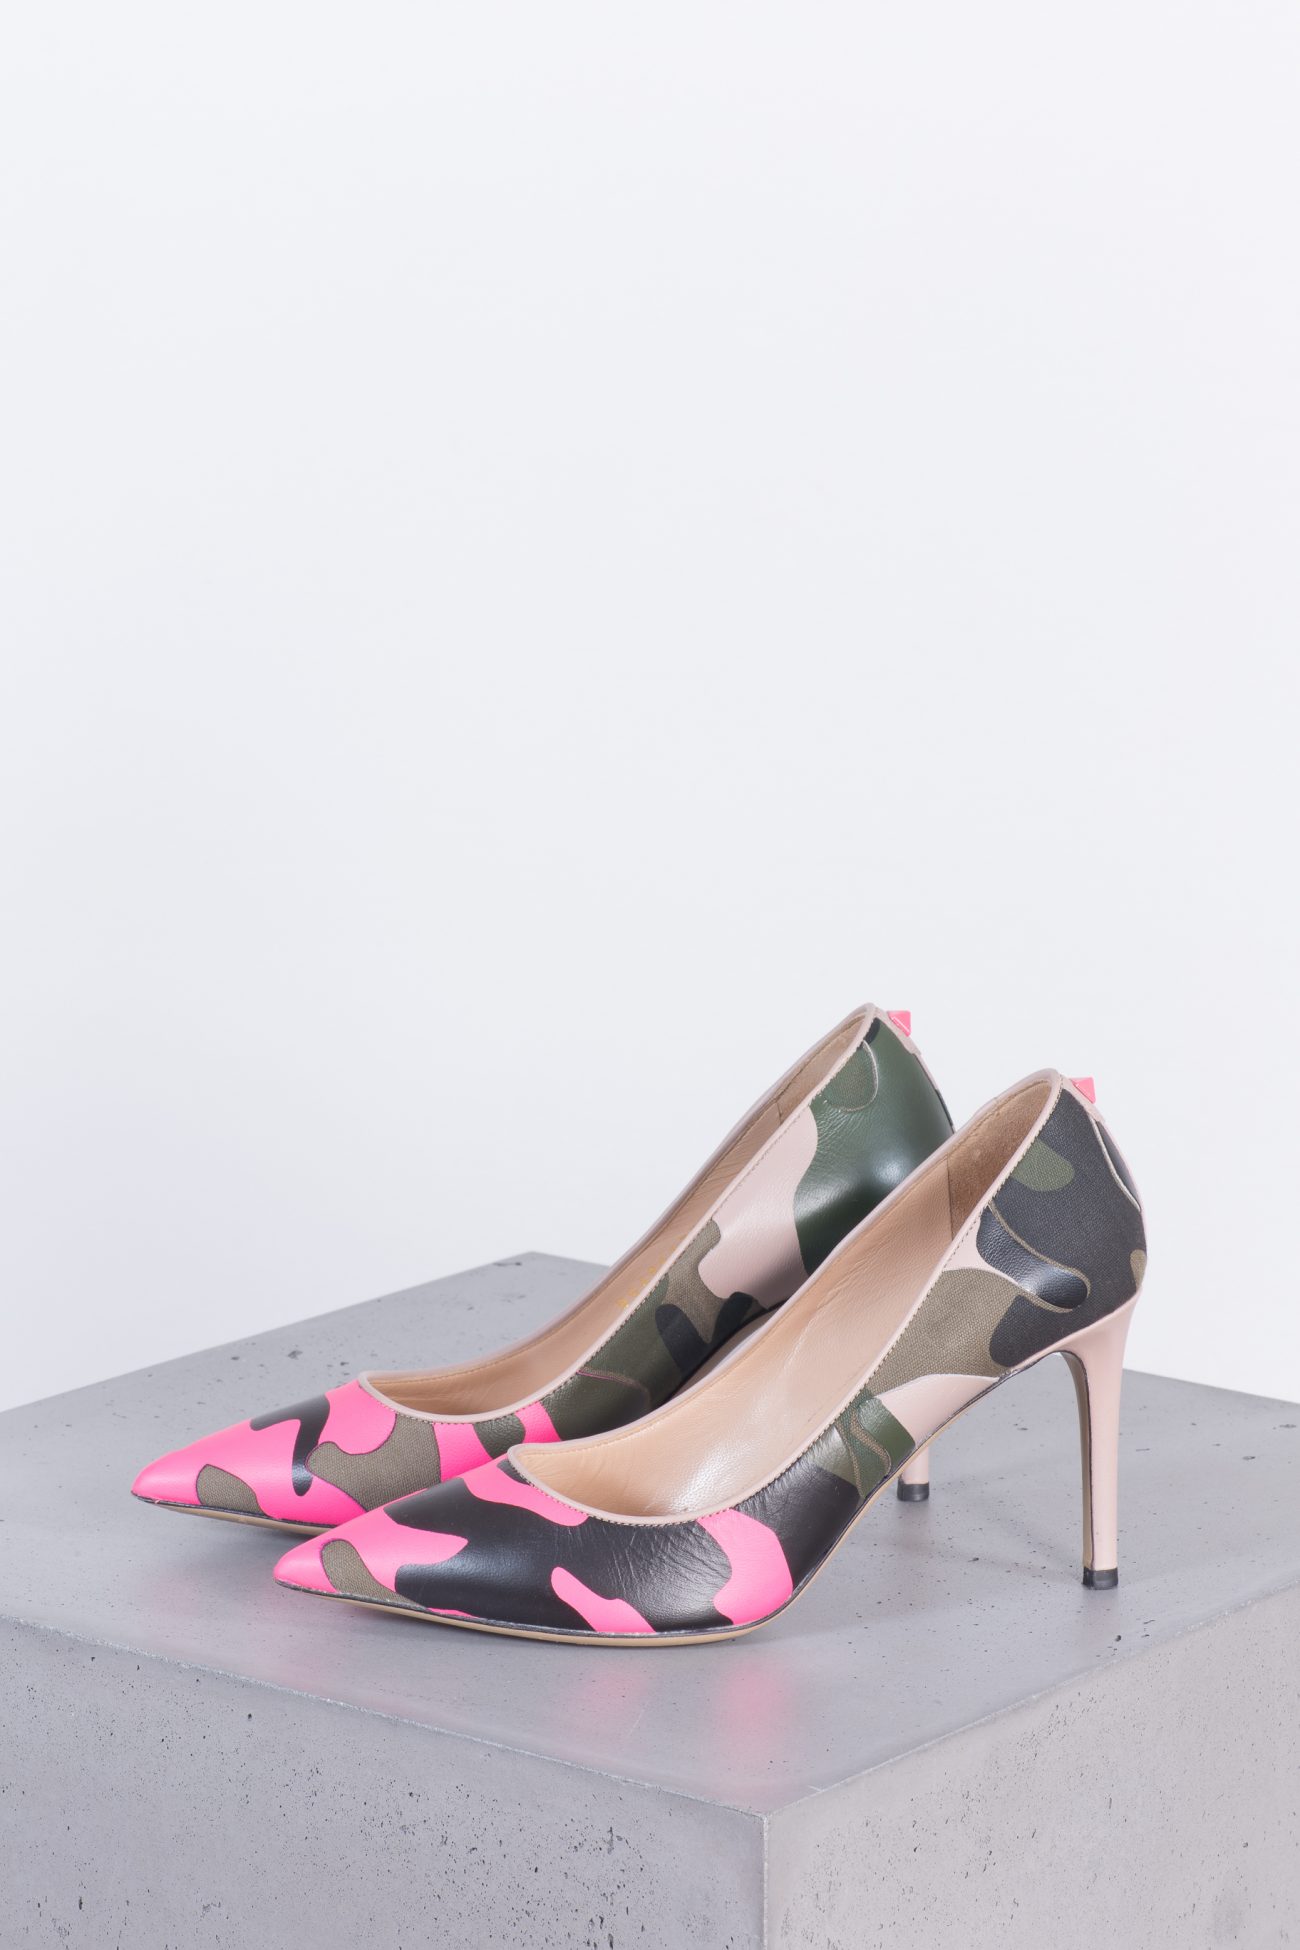 Valentino Shoes, 37 Huntessa Luxury Online Consignment Boutique